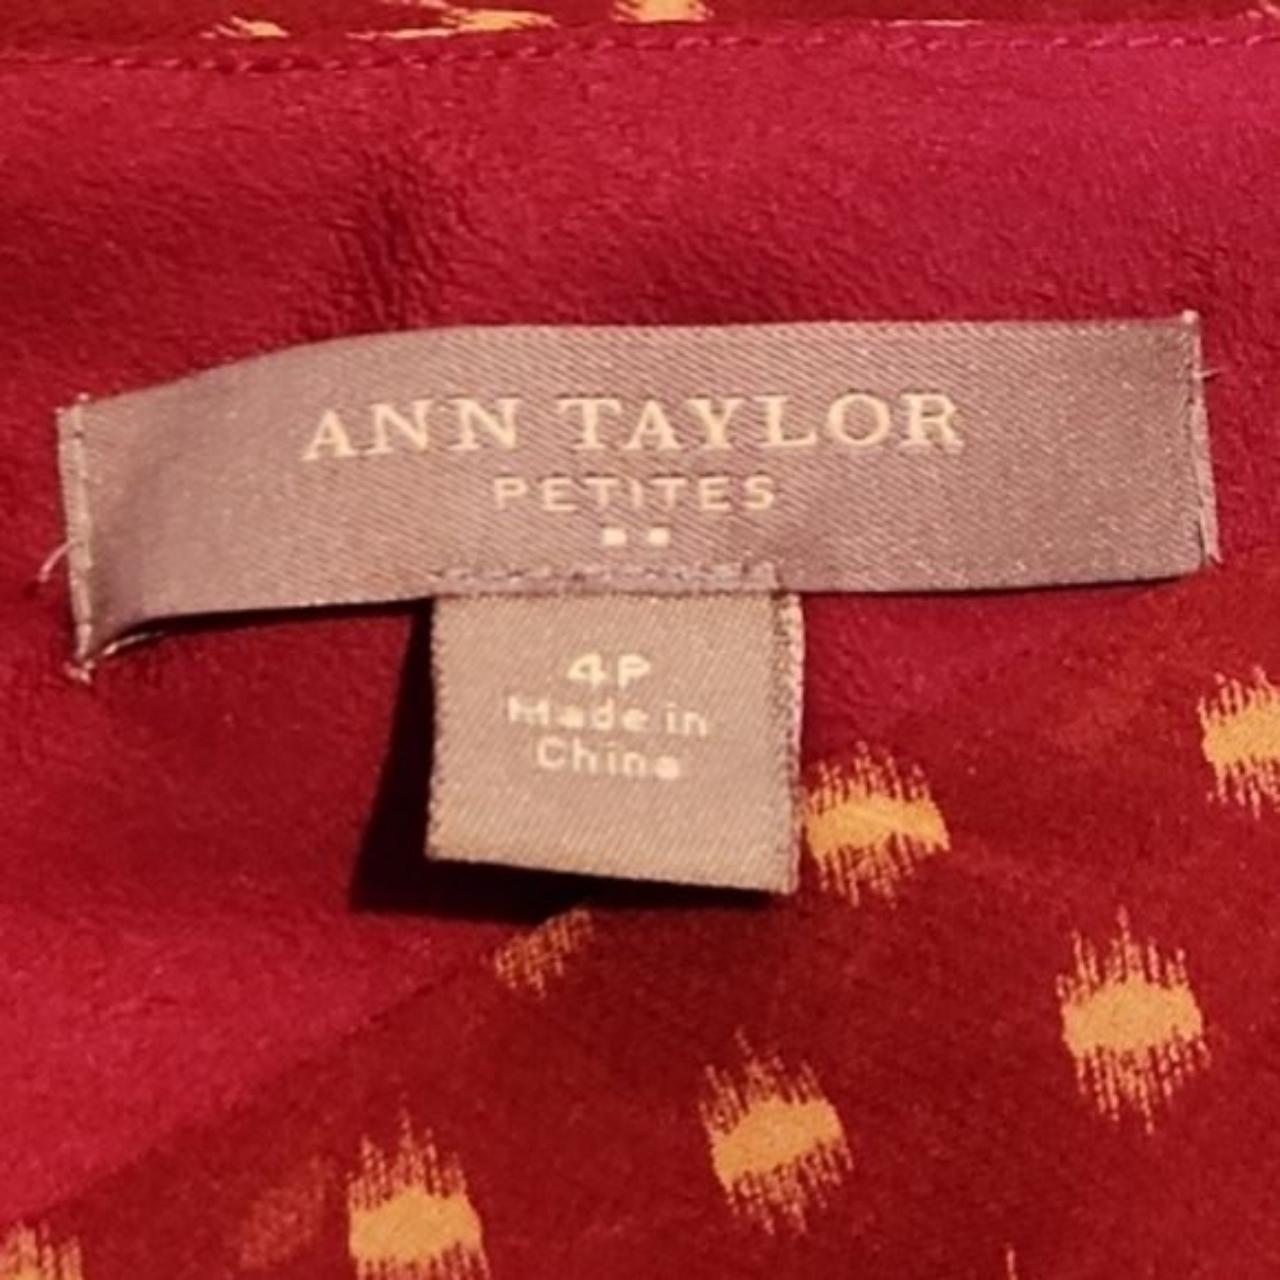 Ann Taylor Women's Red and Tan Skirt (3)